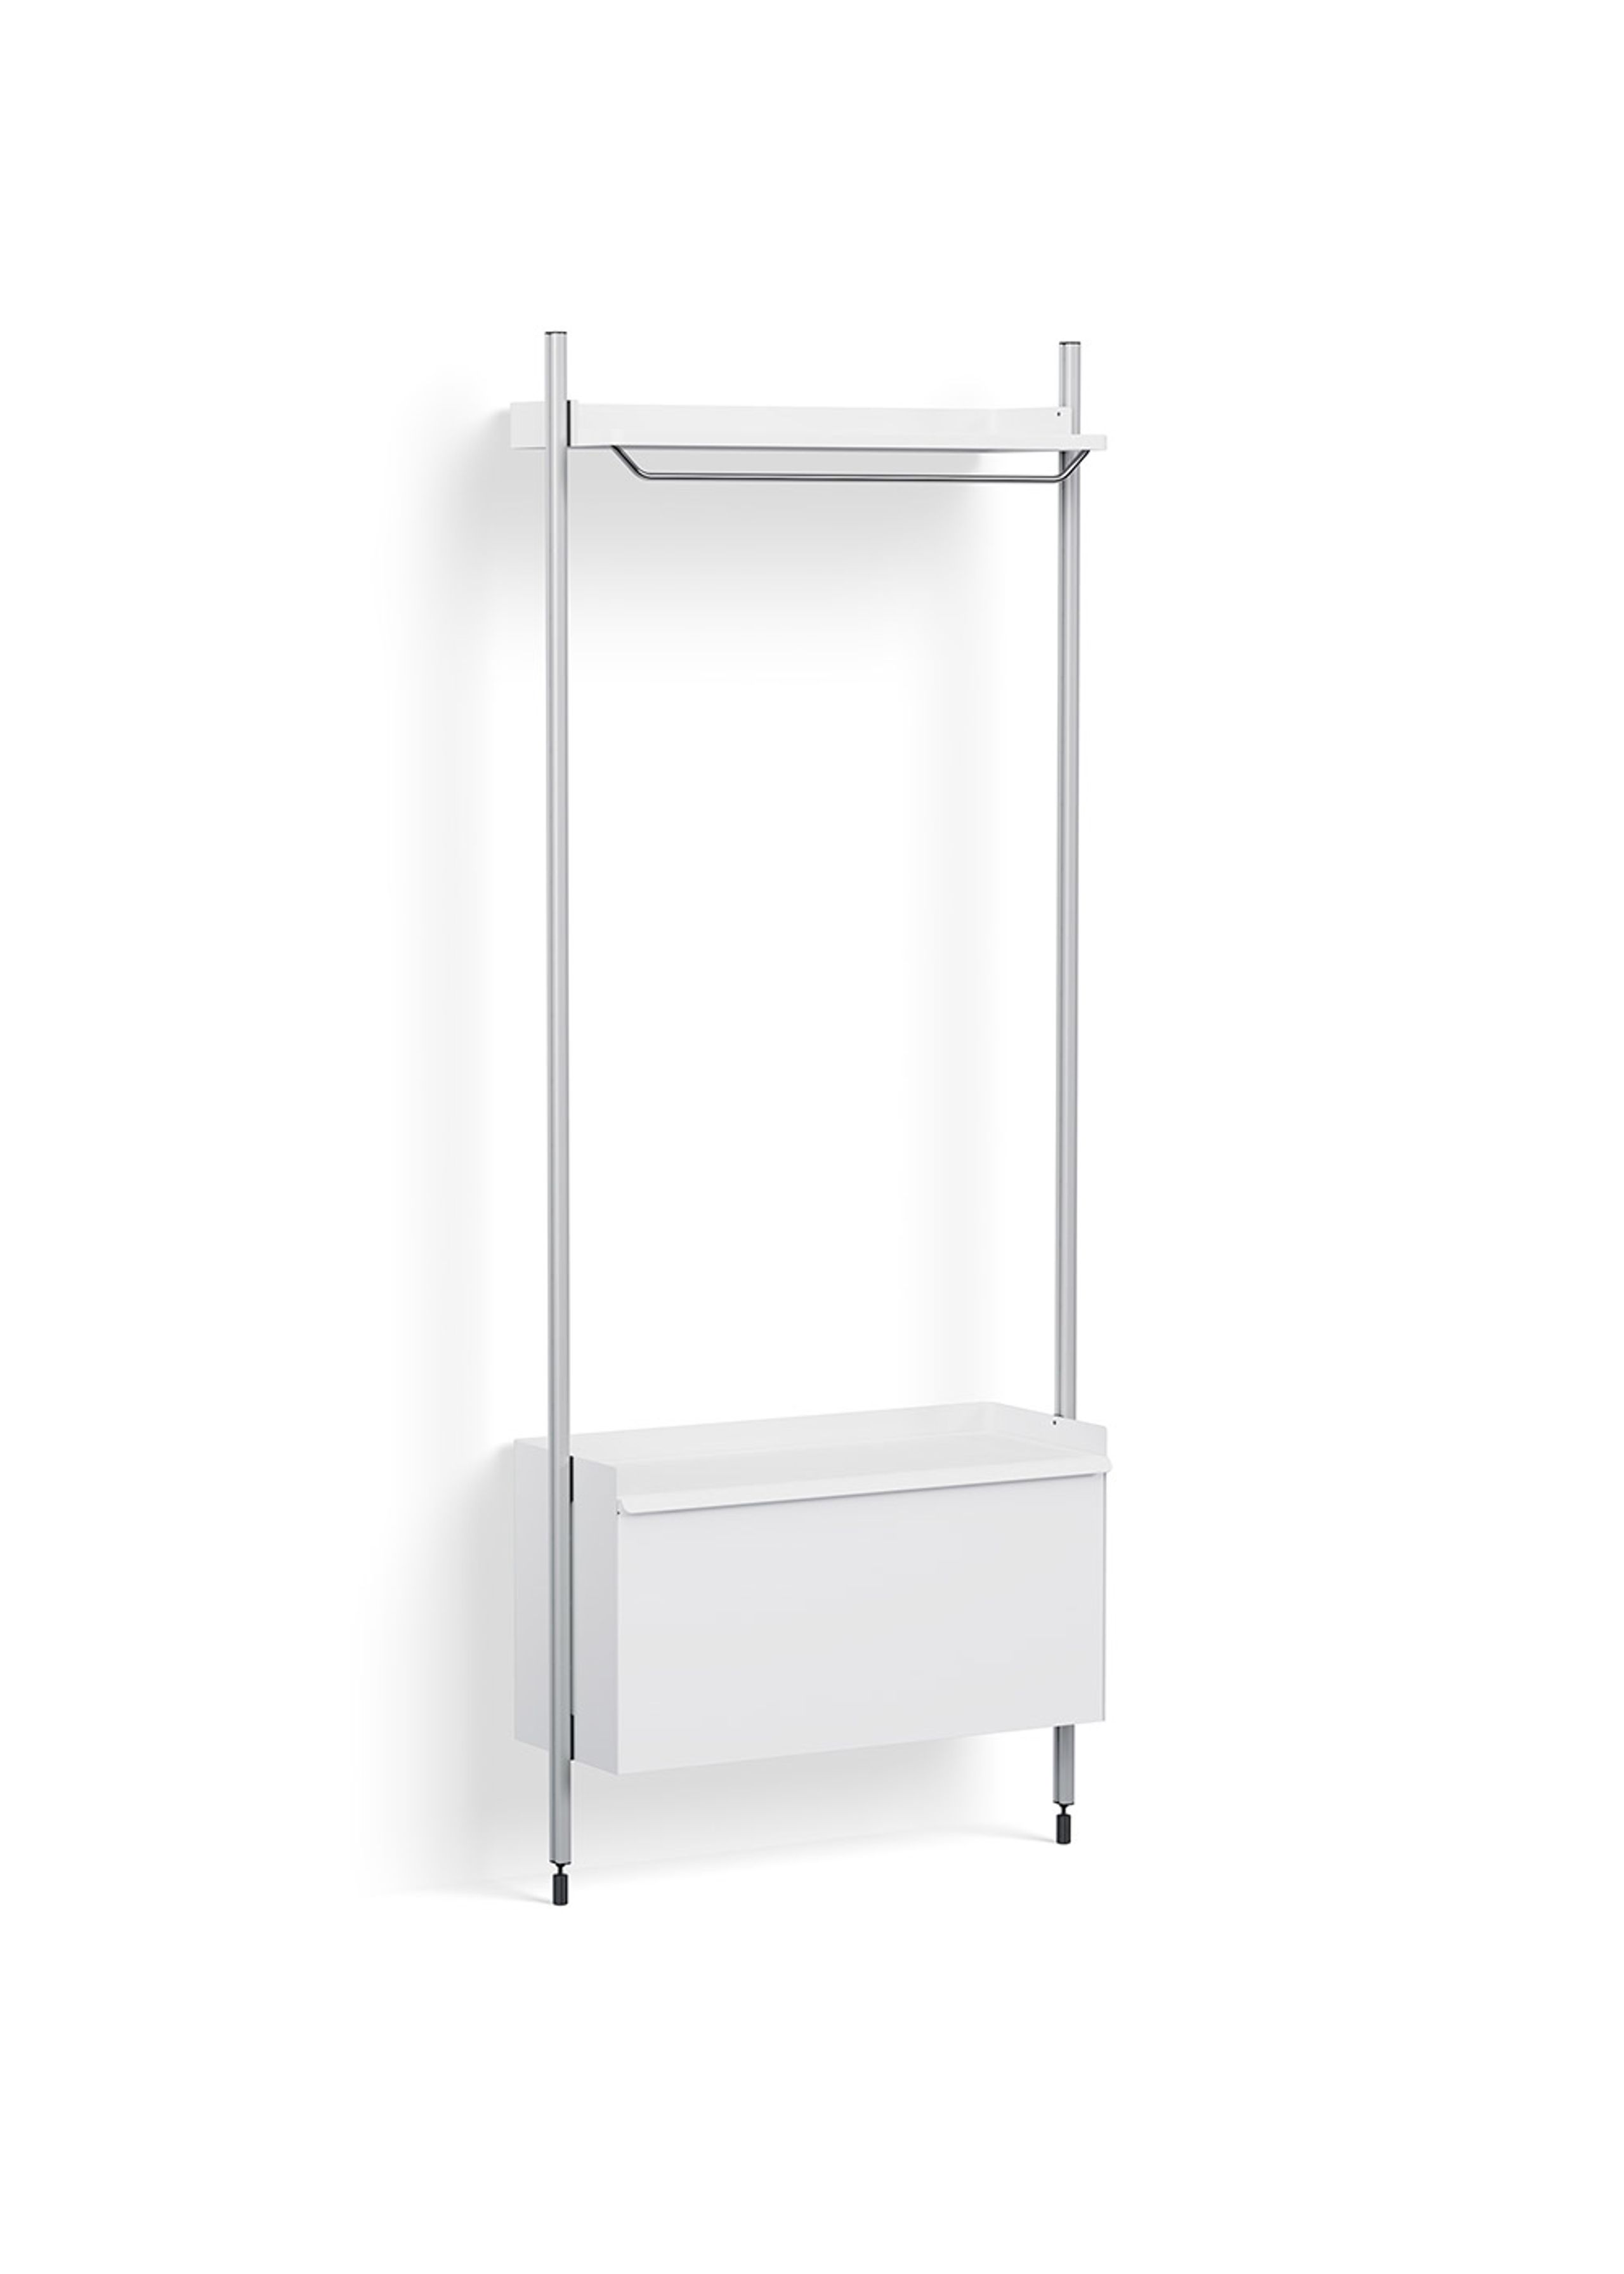 HAY - Reol - Pier System / No. 1001 - White / Clear Anodised Aluminium